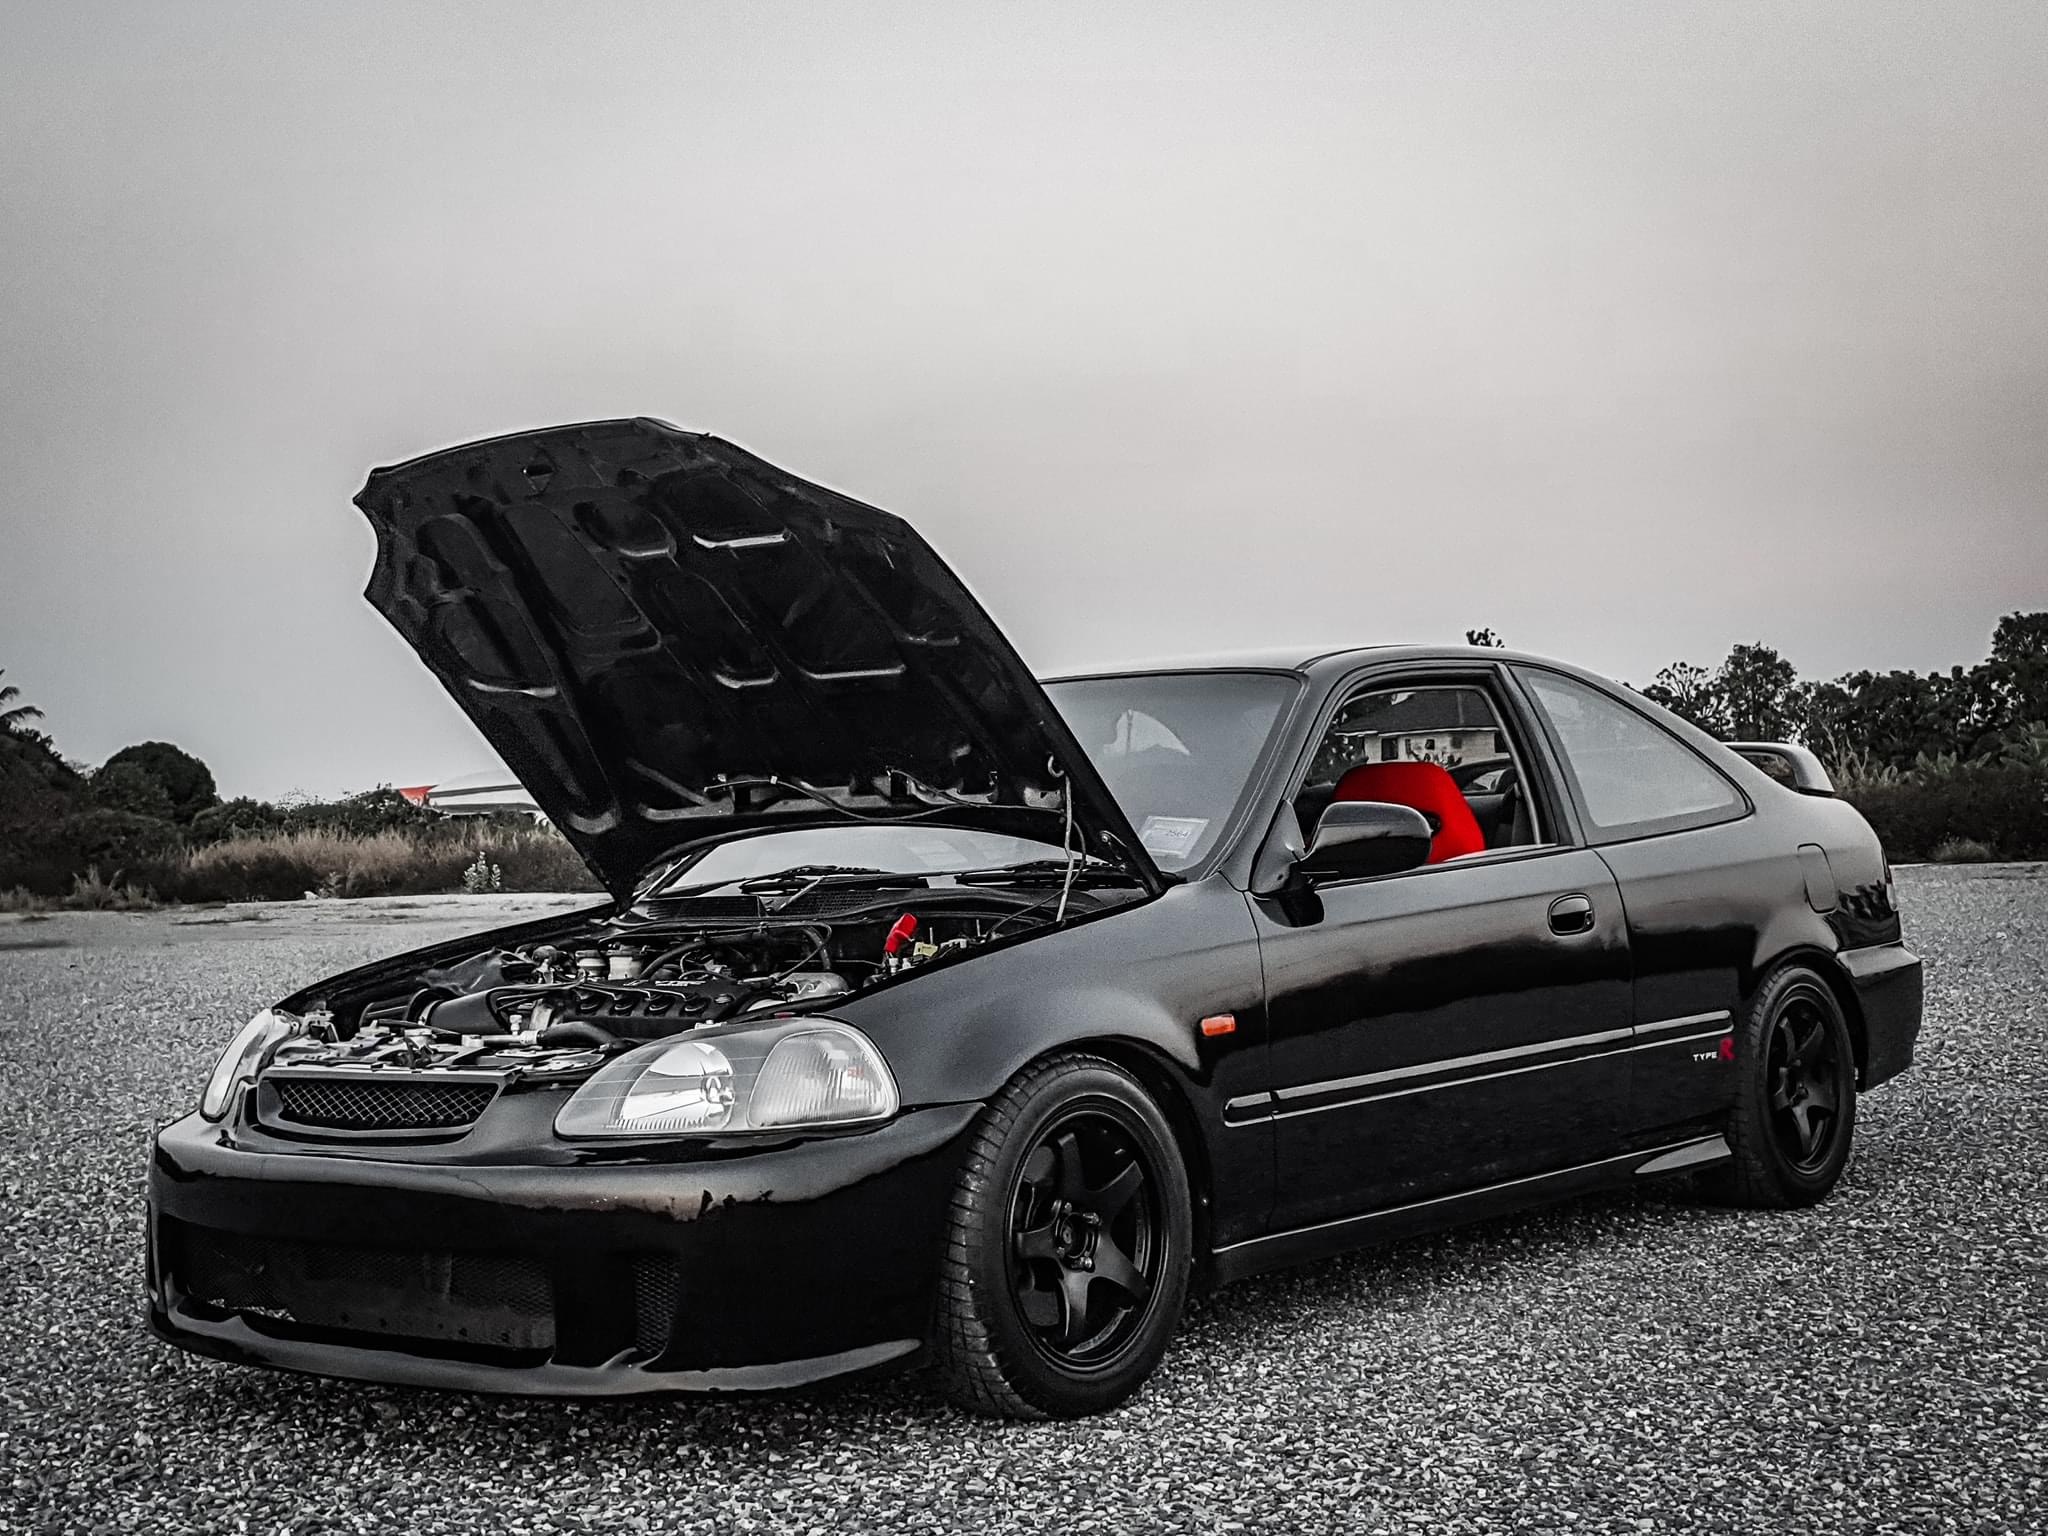 CIVIC COUPE STYLE US